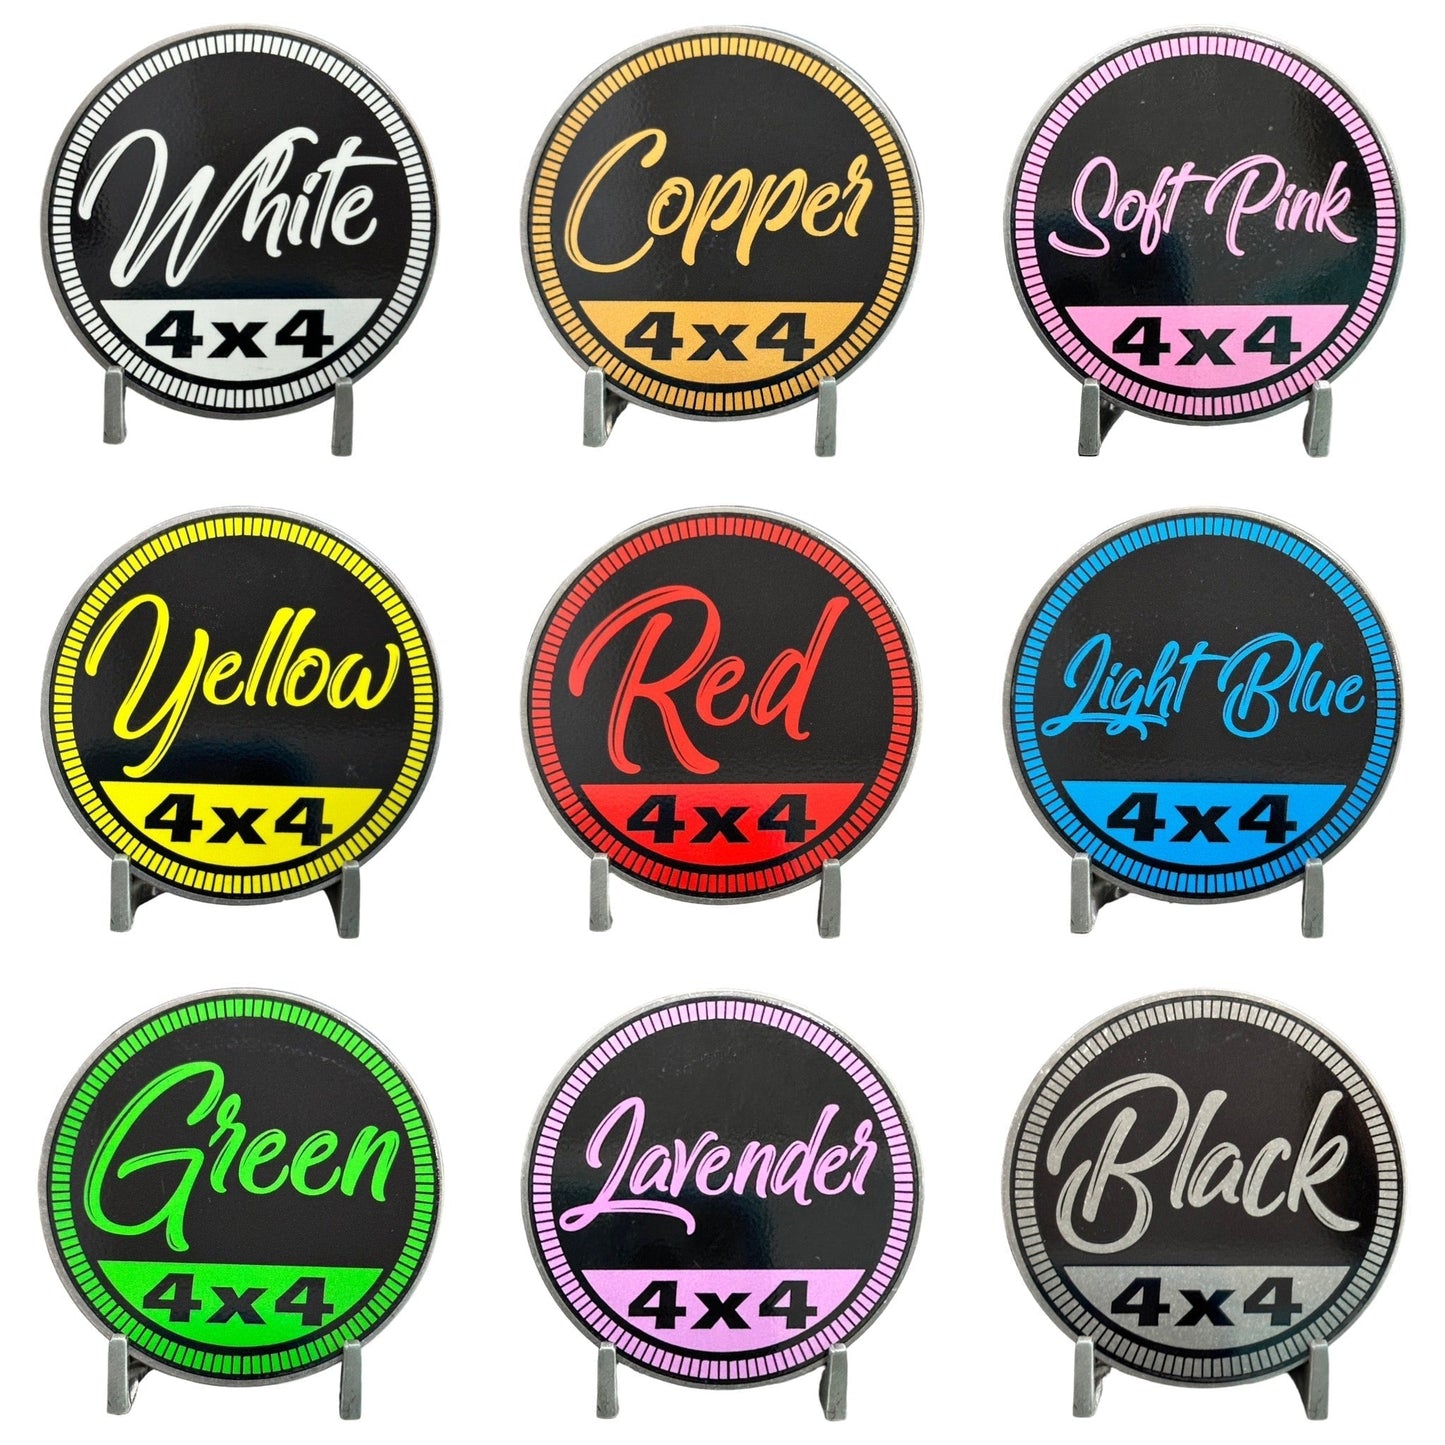 Badge - Riverbend Jeeps (Multiple Colors Available)